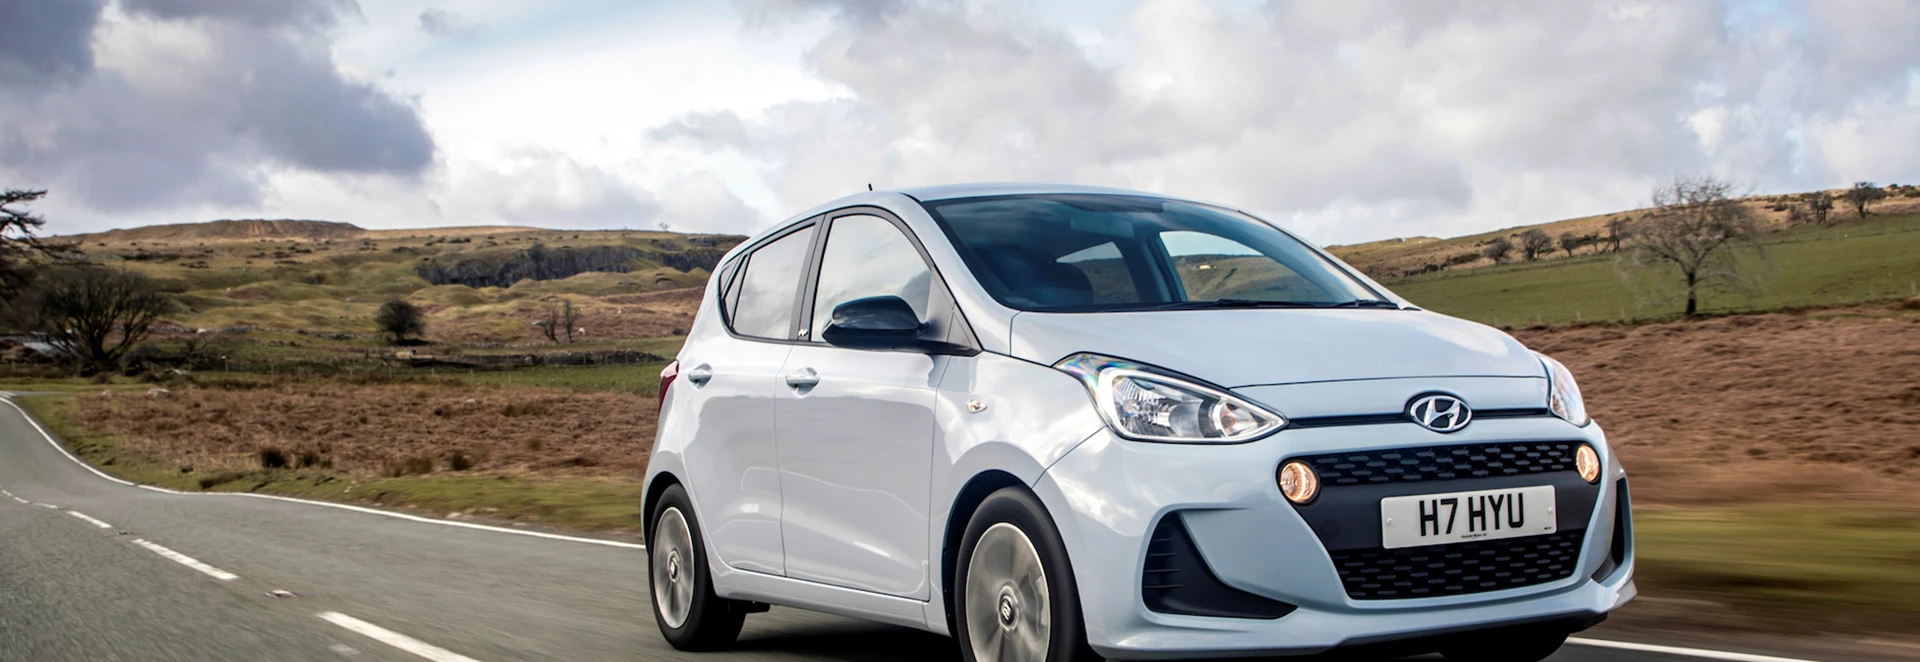 Hyundai introduces Play special editions to i10 and i20 ranges